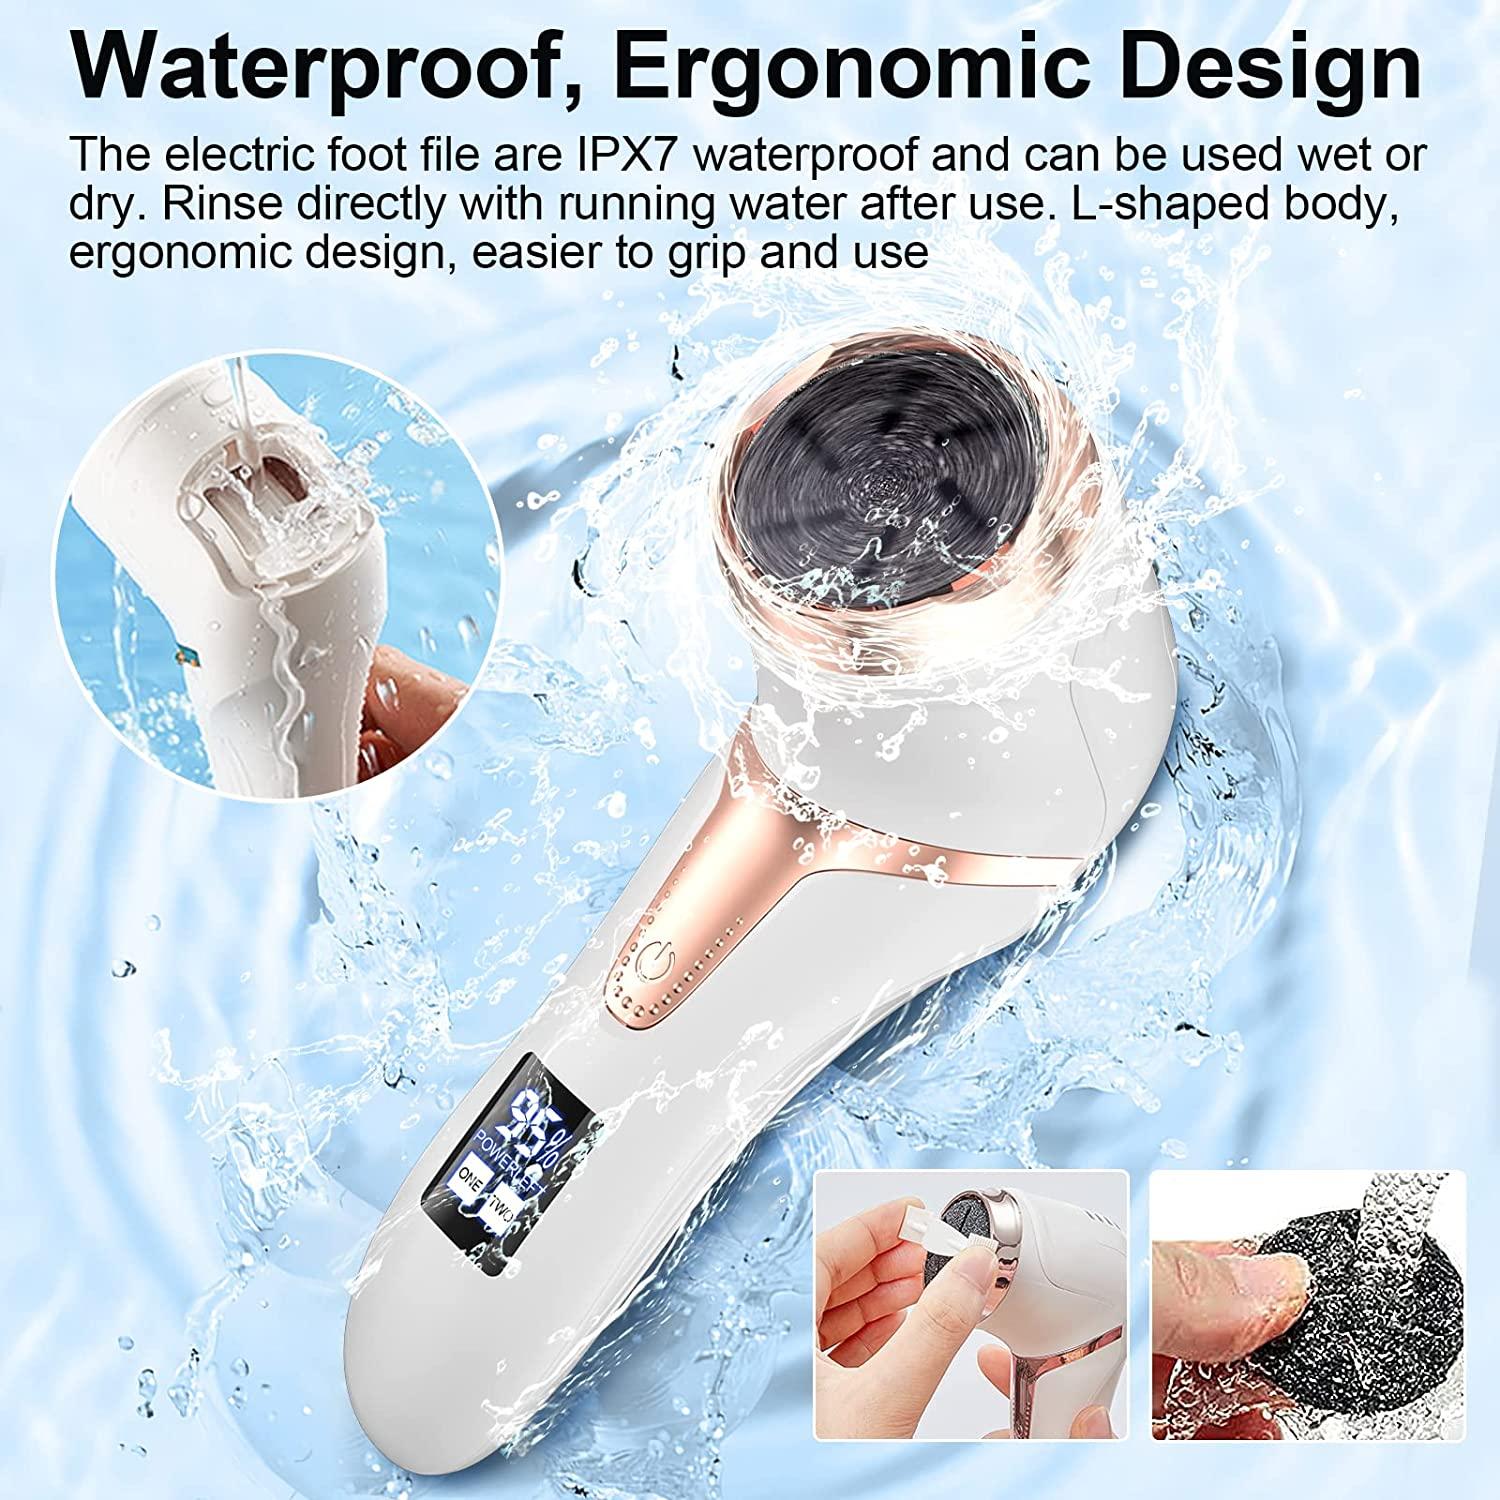 Callusfune - The Foot Callus Remover, Pedicure Wand for Feet Electric